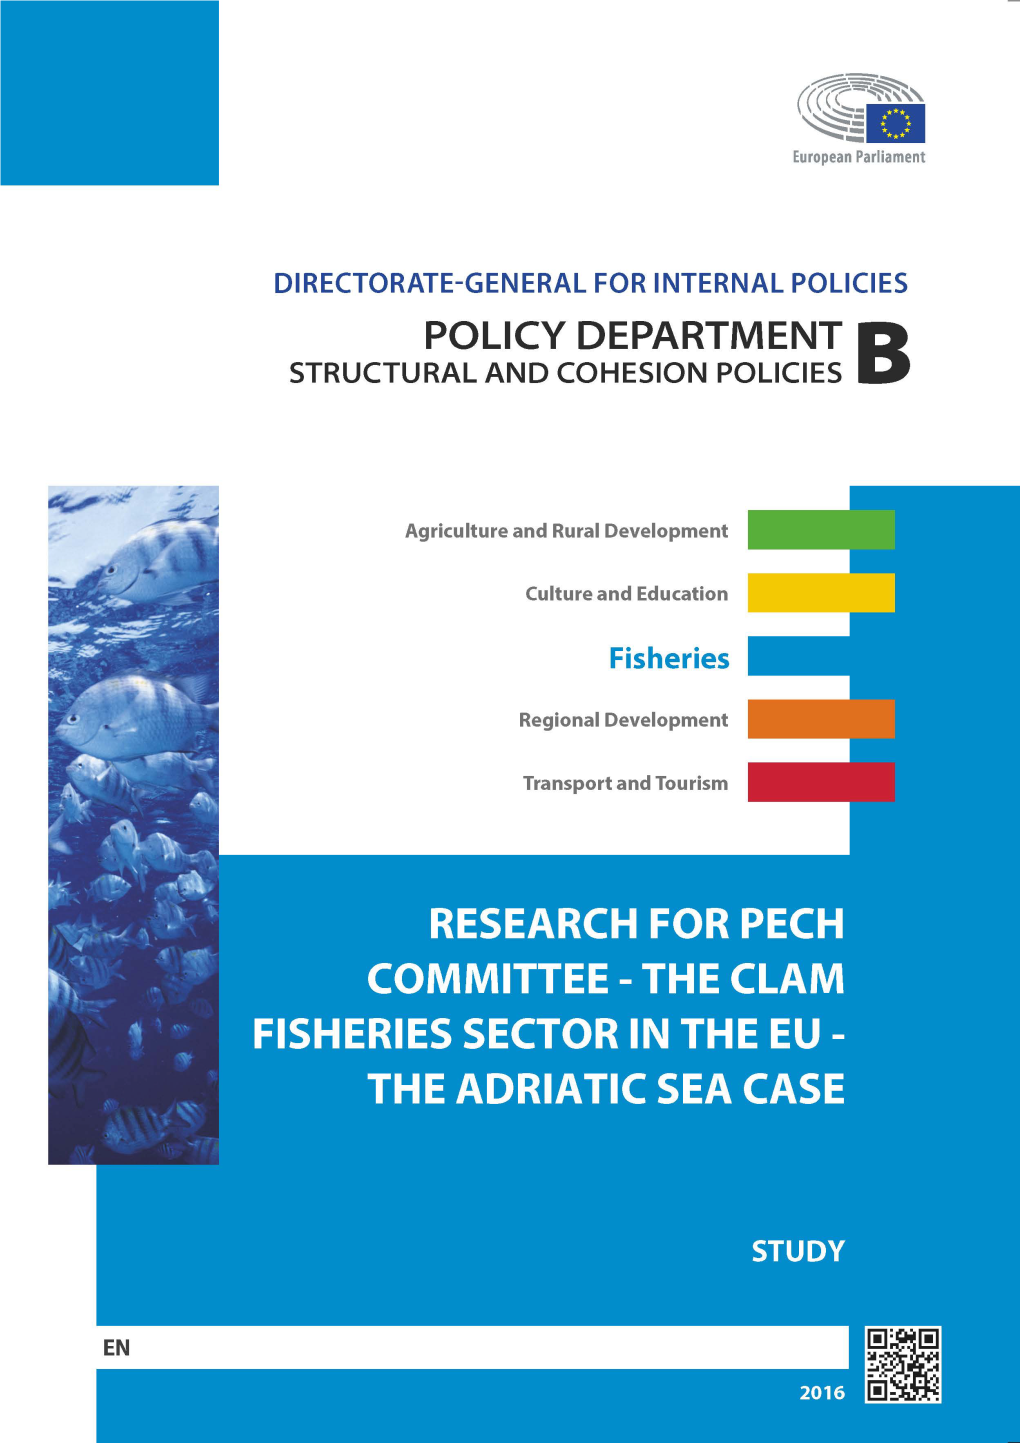 The Clam Fisheries Sector in the Eu – the Adriatic Sea Case